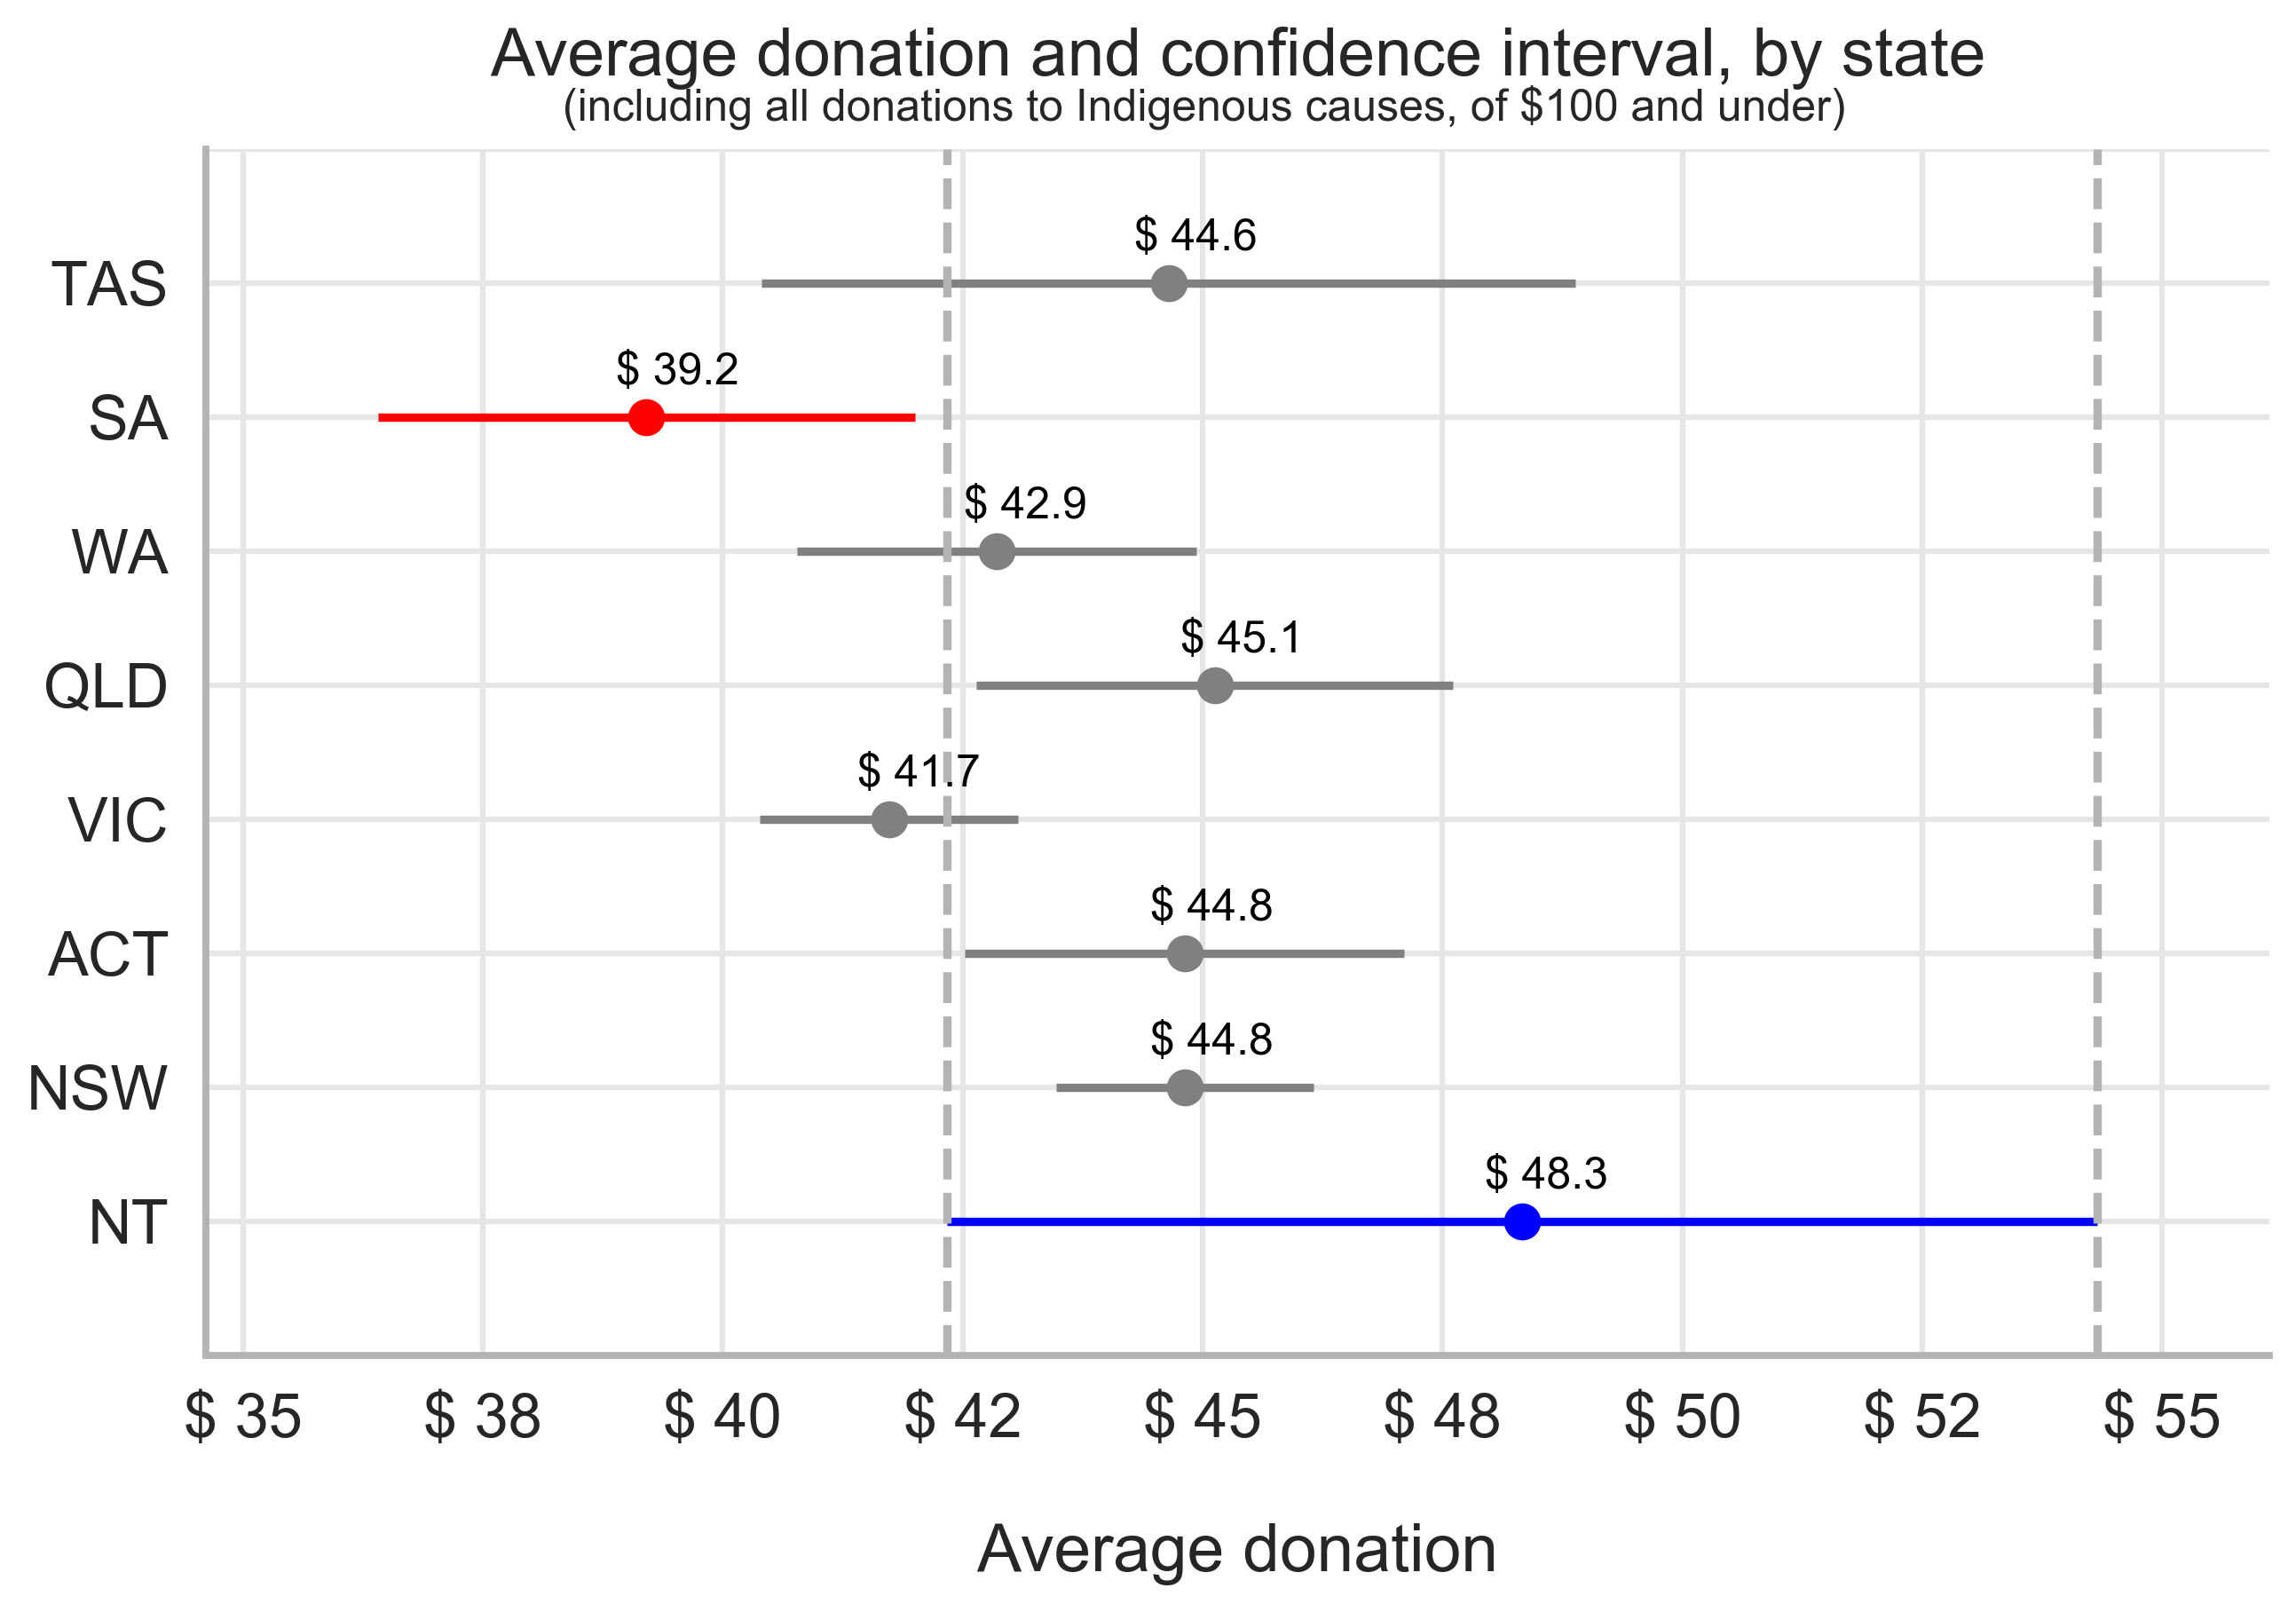 Figure 4A - NT average donation ranking - indigenous - 100 and under